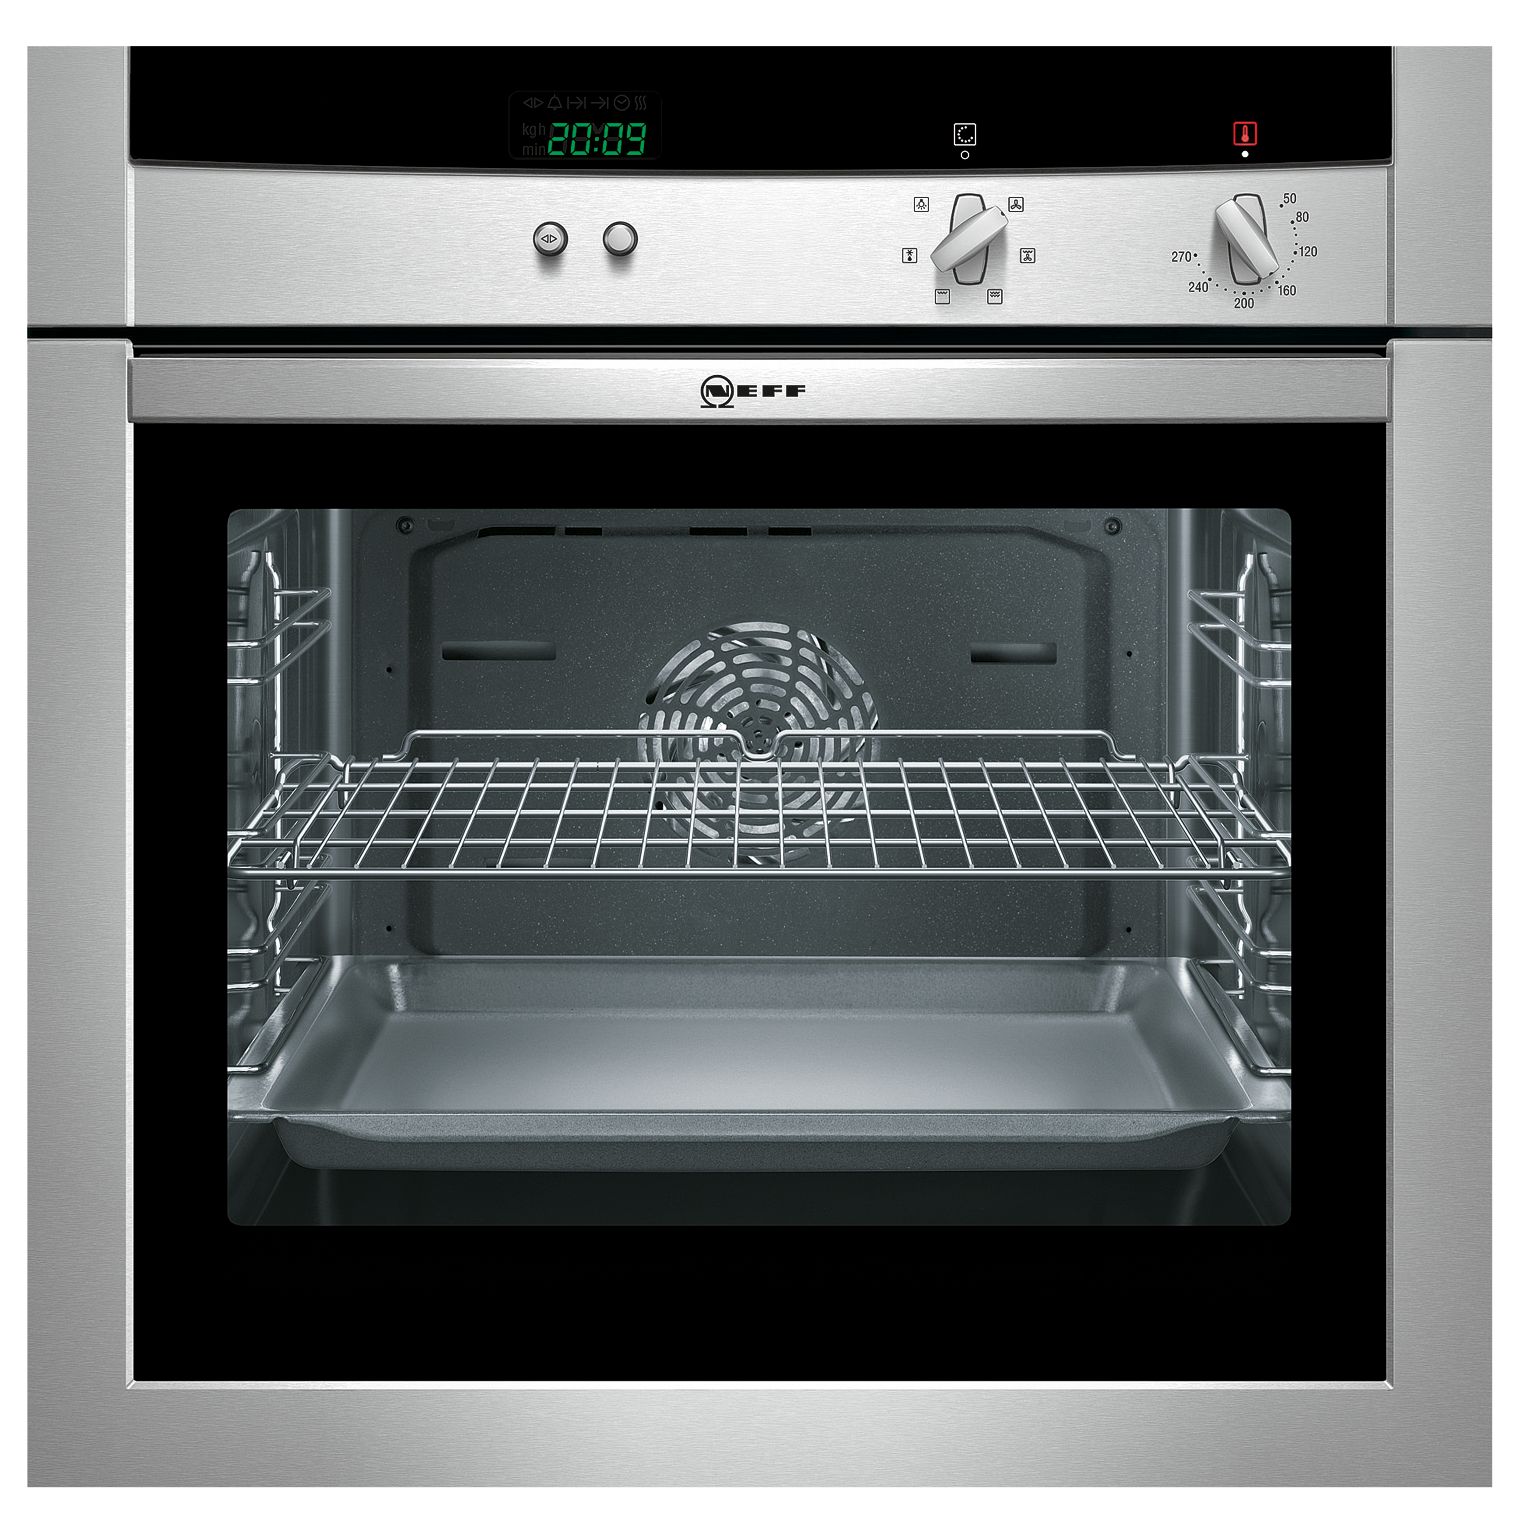 Neff B15M42N0GB Single Electric Oven, Stainless Steel at John Lewis